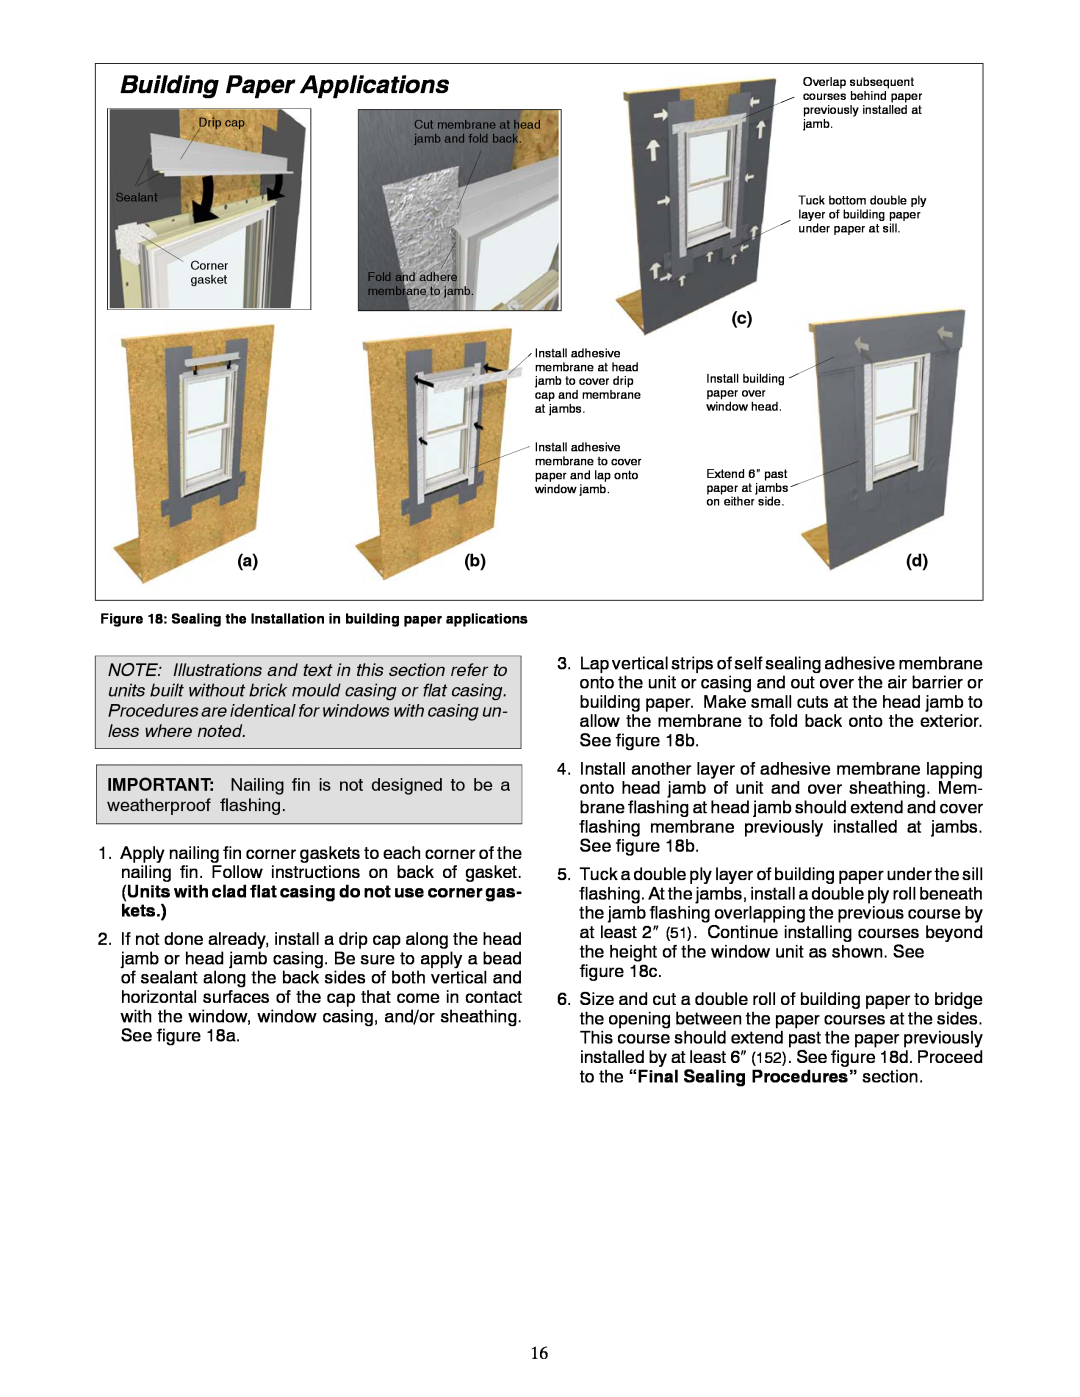 Marvin Window manual Building Paper Applications, Sealing the Installation in building paper applications 